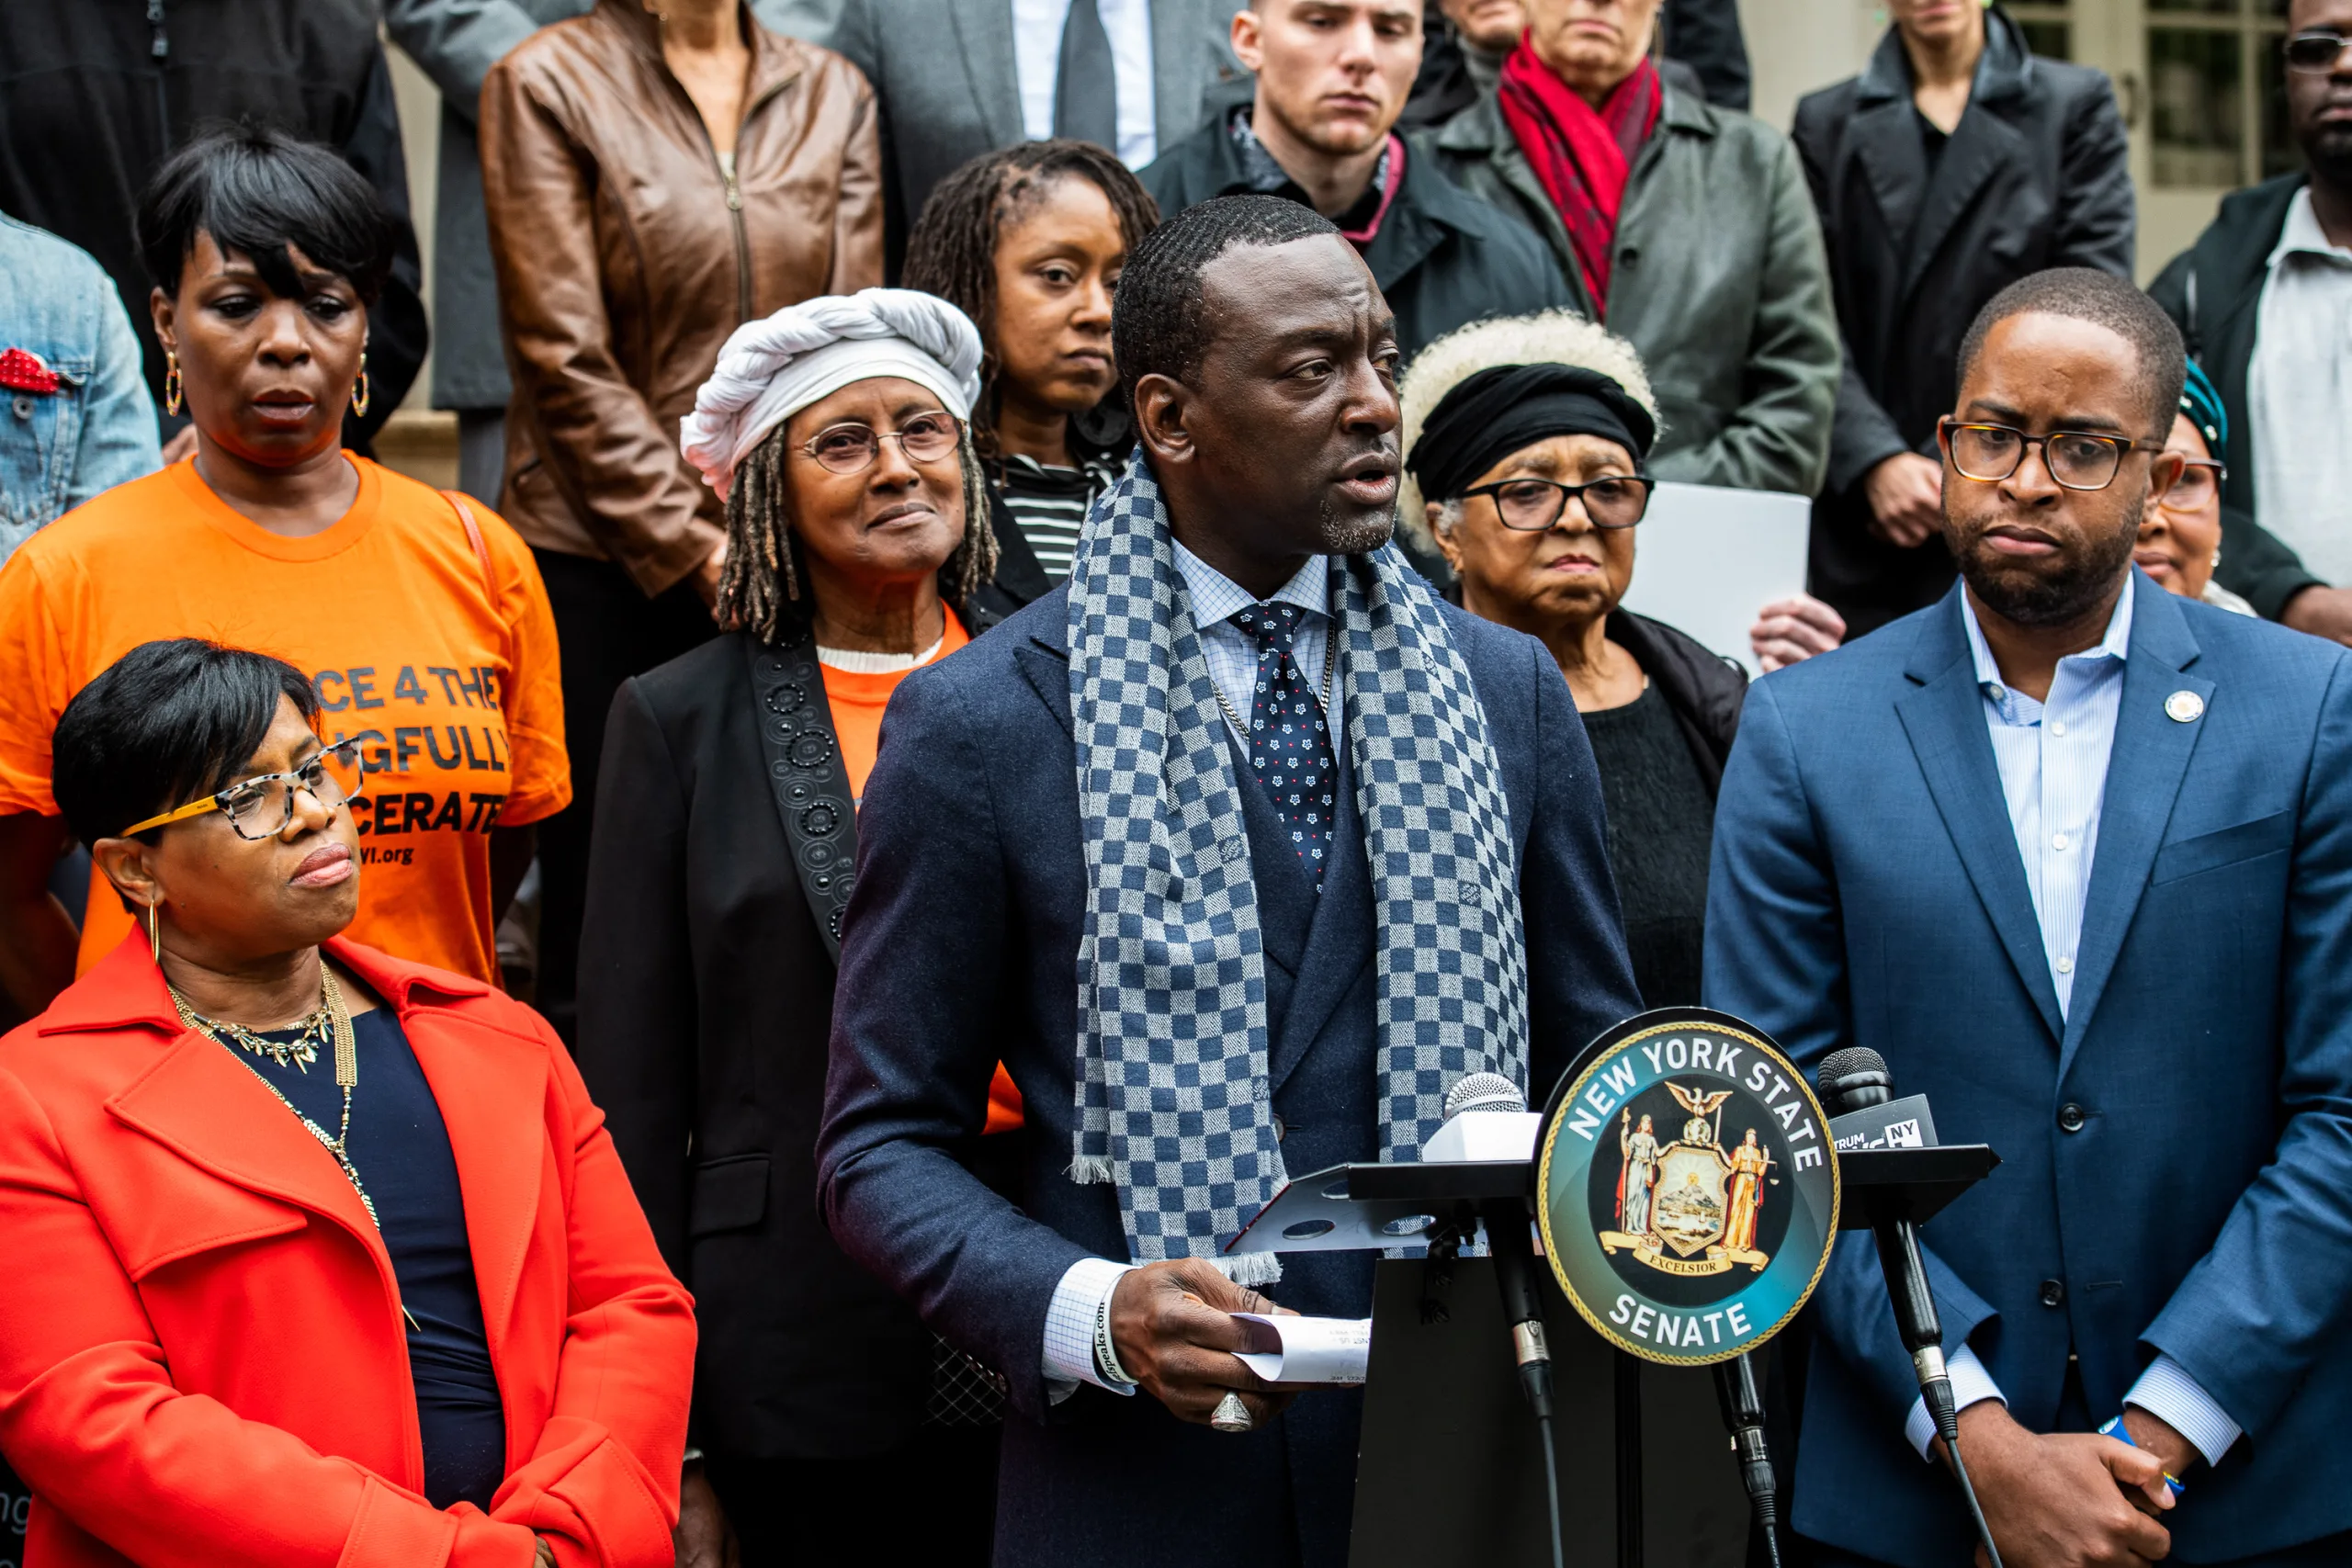 Dawn Mitchell of Legal Aid, Dr. Yusef Salaam, and Rep. Zellnor Myrie on Tuesday, Oct. 29, 2019 in New York. (Larry Busacca/AP Images for the Innocence Project)